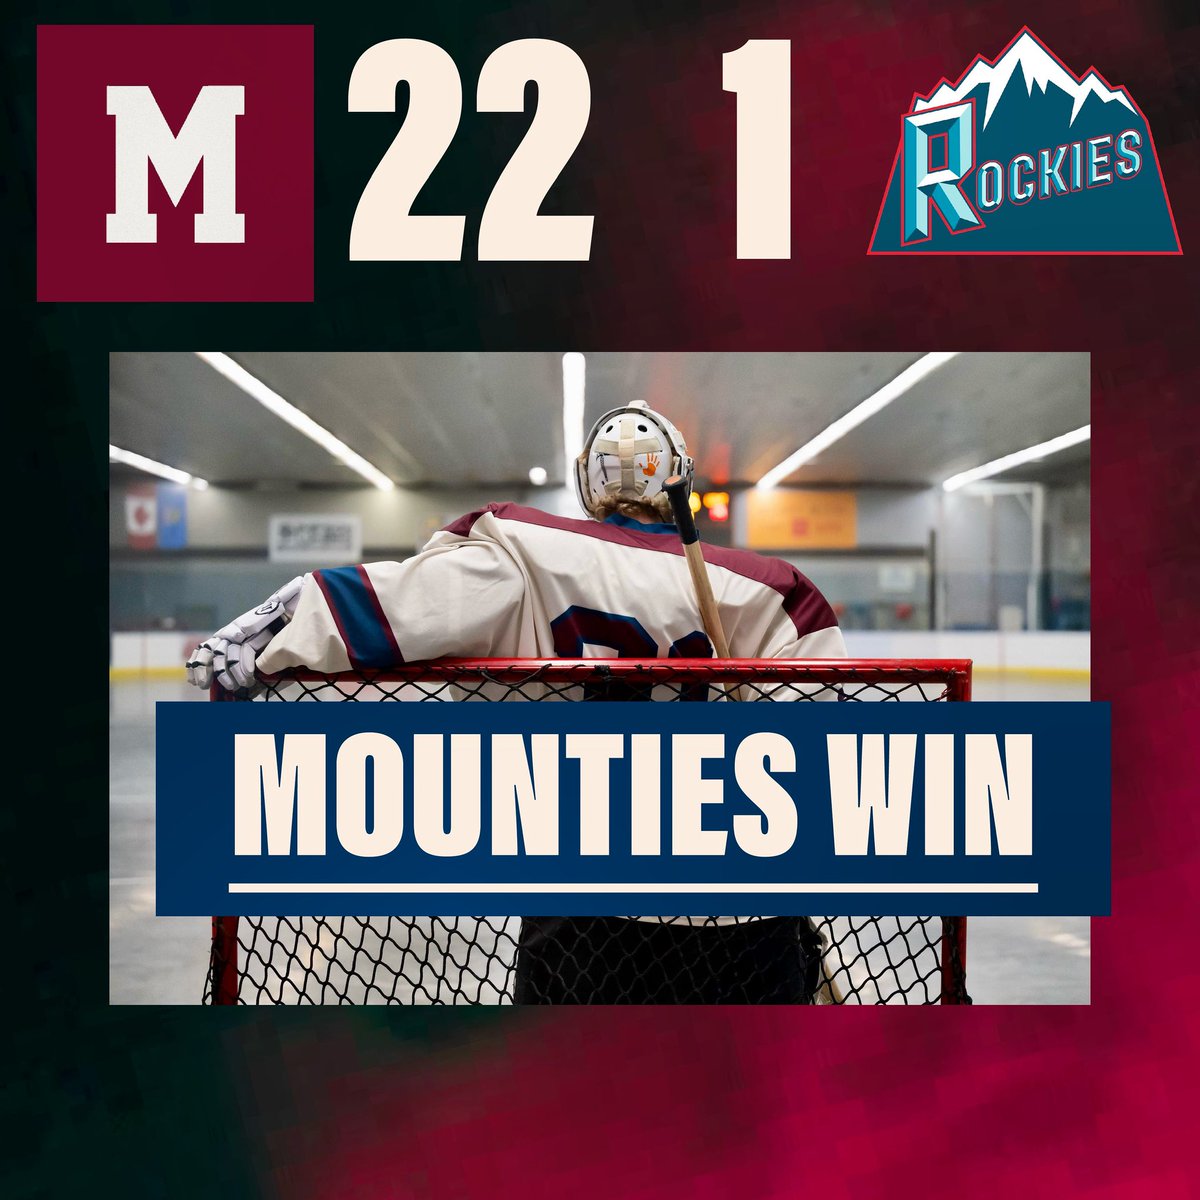 Final from The ARC

#Mountaineerslax